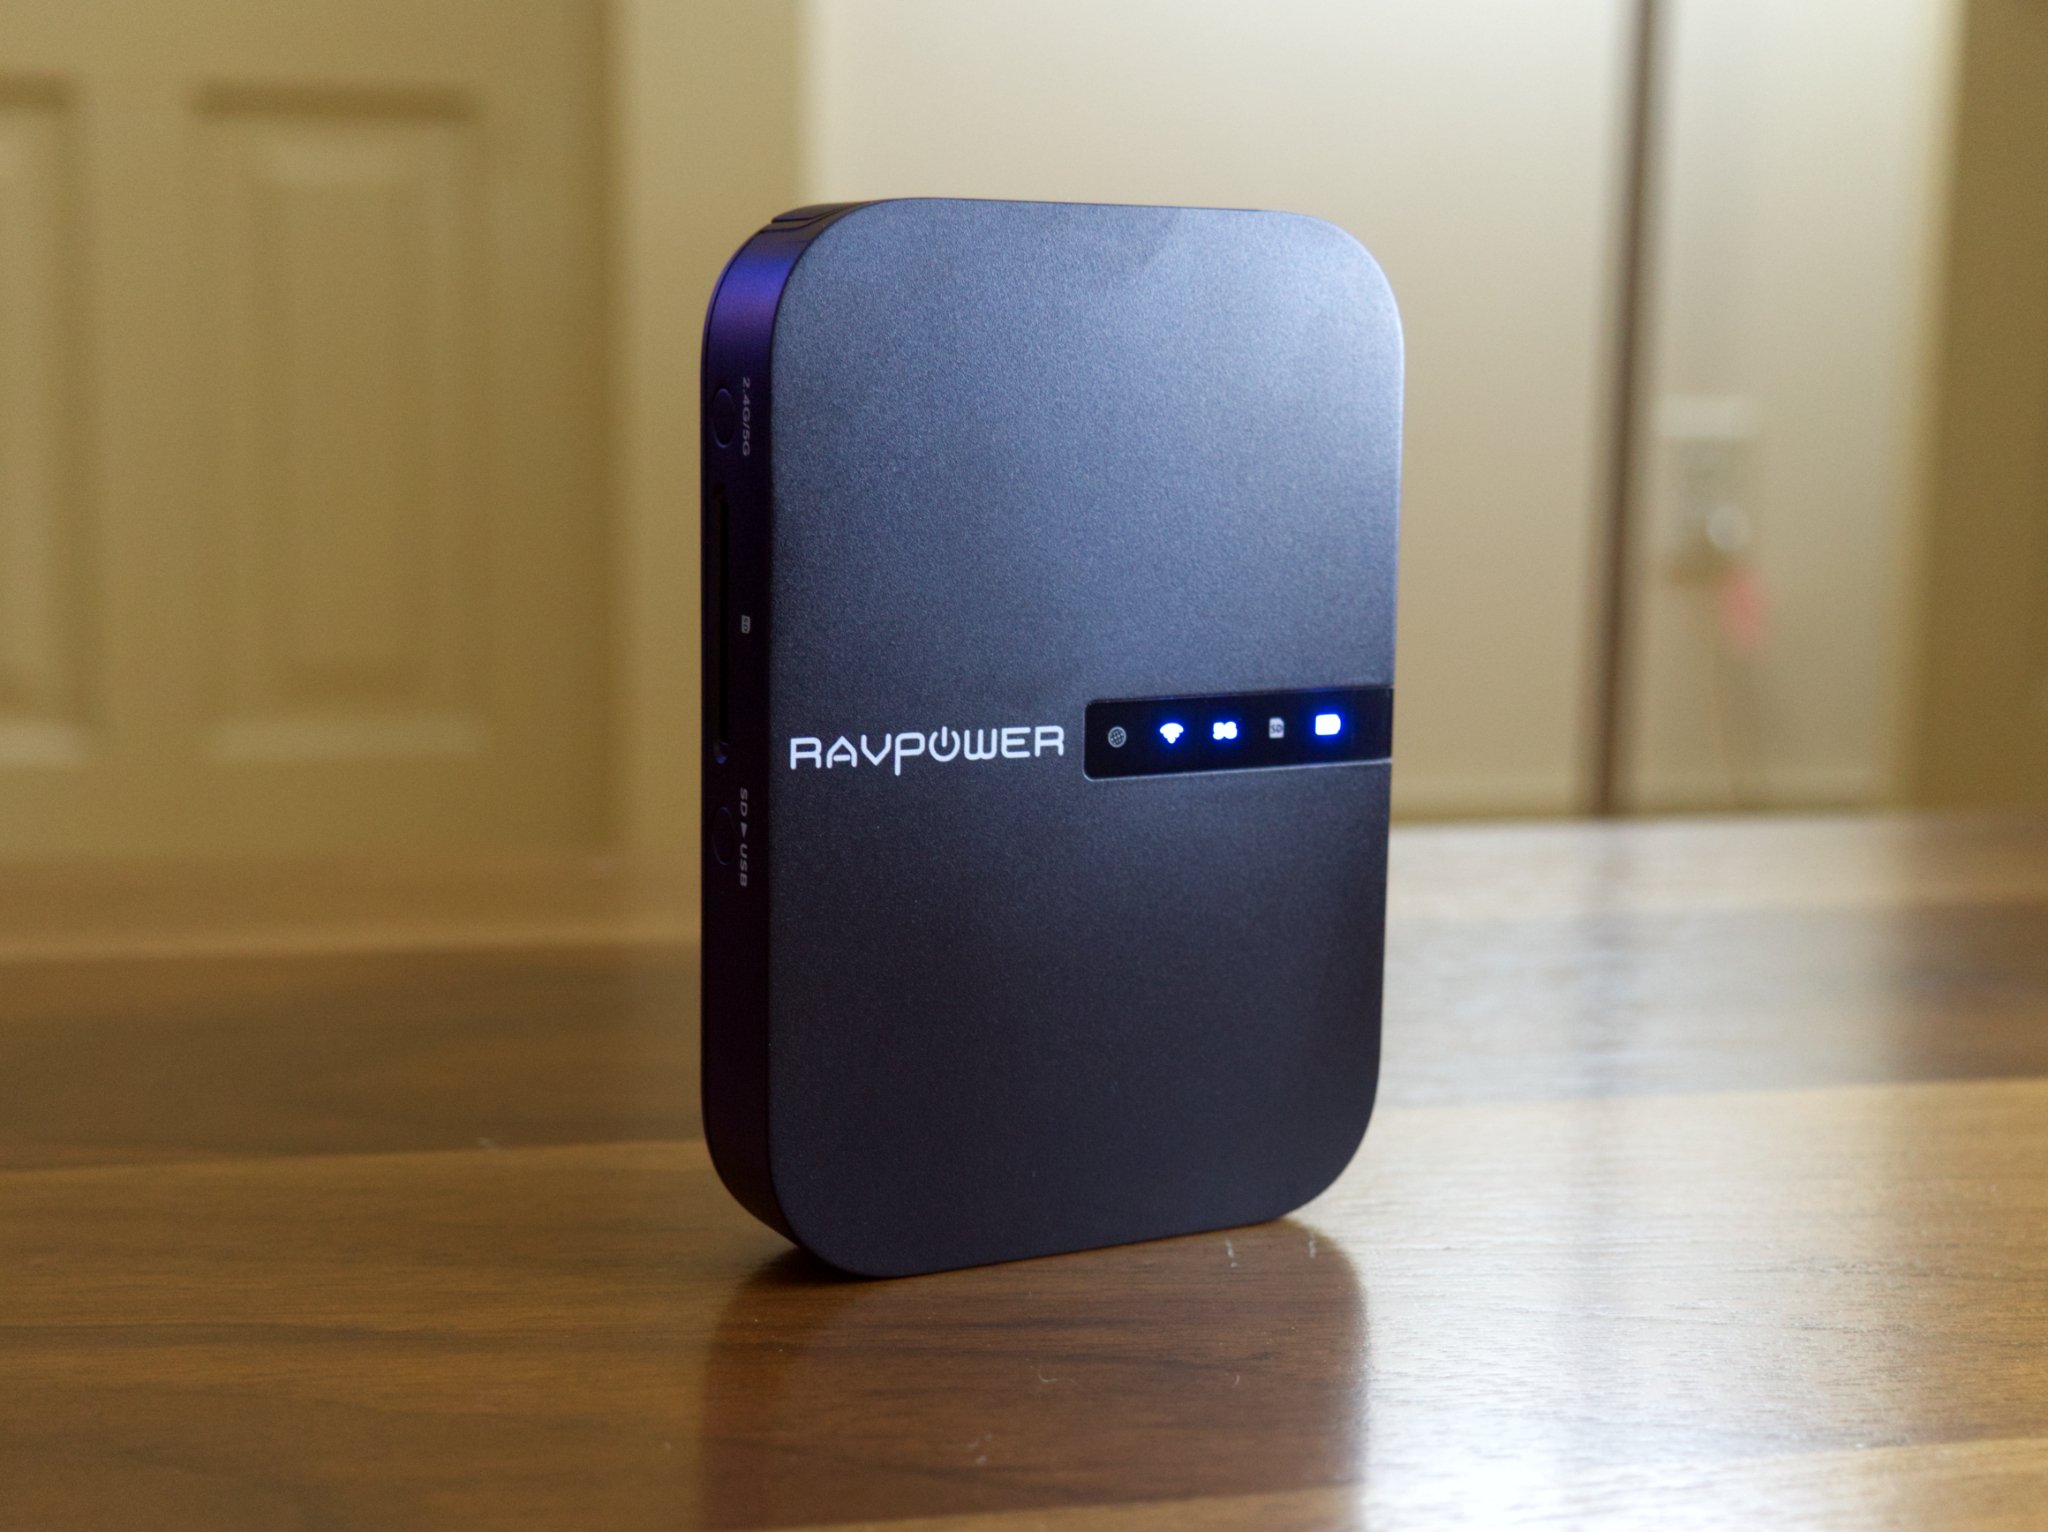 This RAVPower Travel Router provides Wi-Fi, an external battery pack, media  server and more for $30 (Reg. $50)